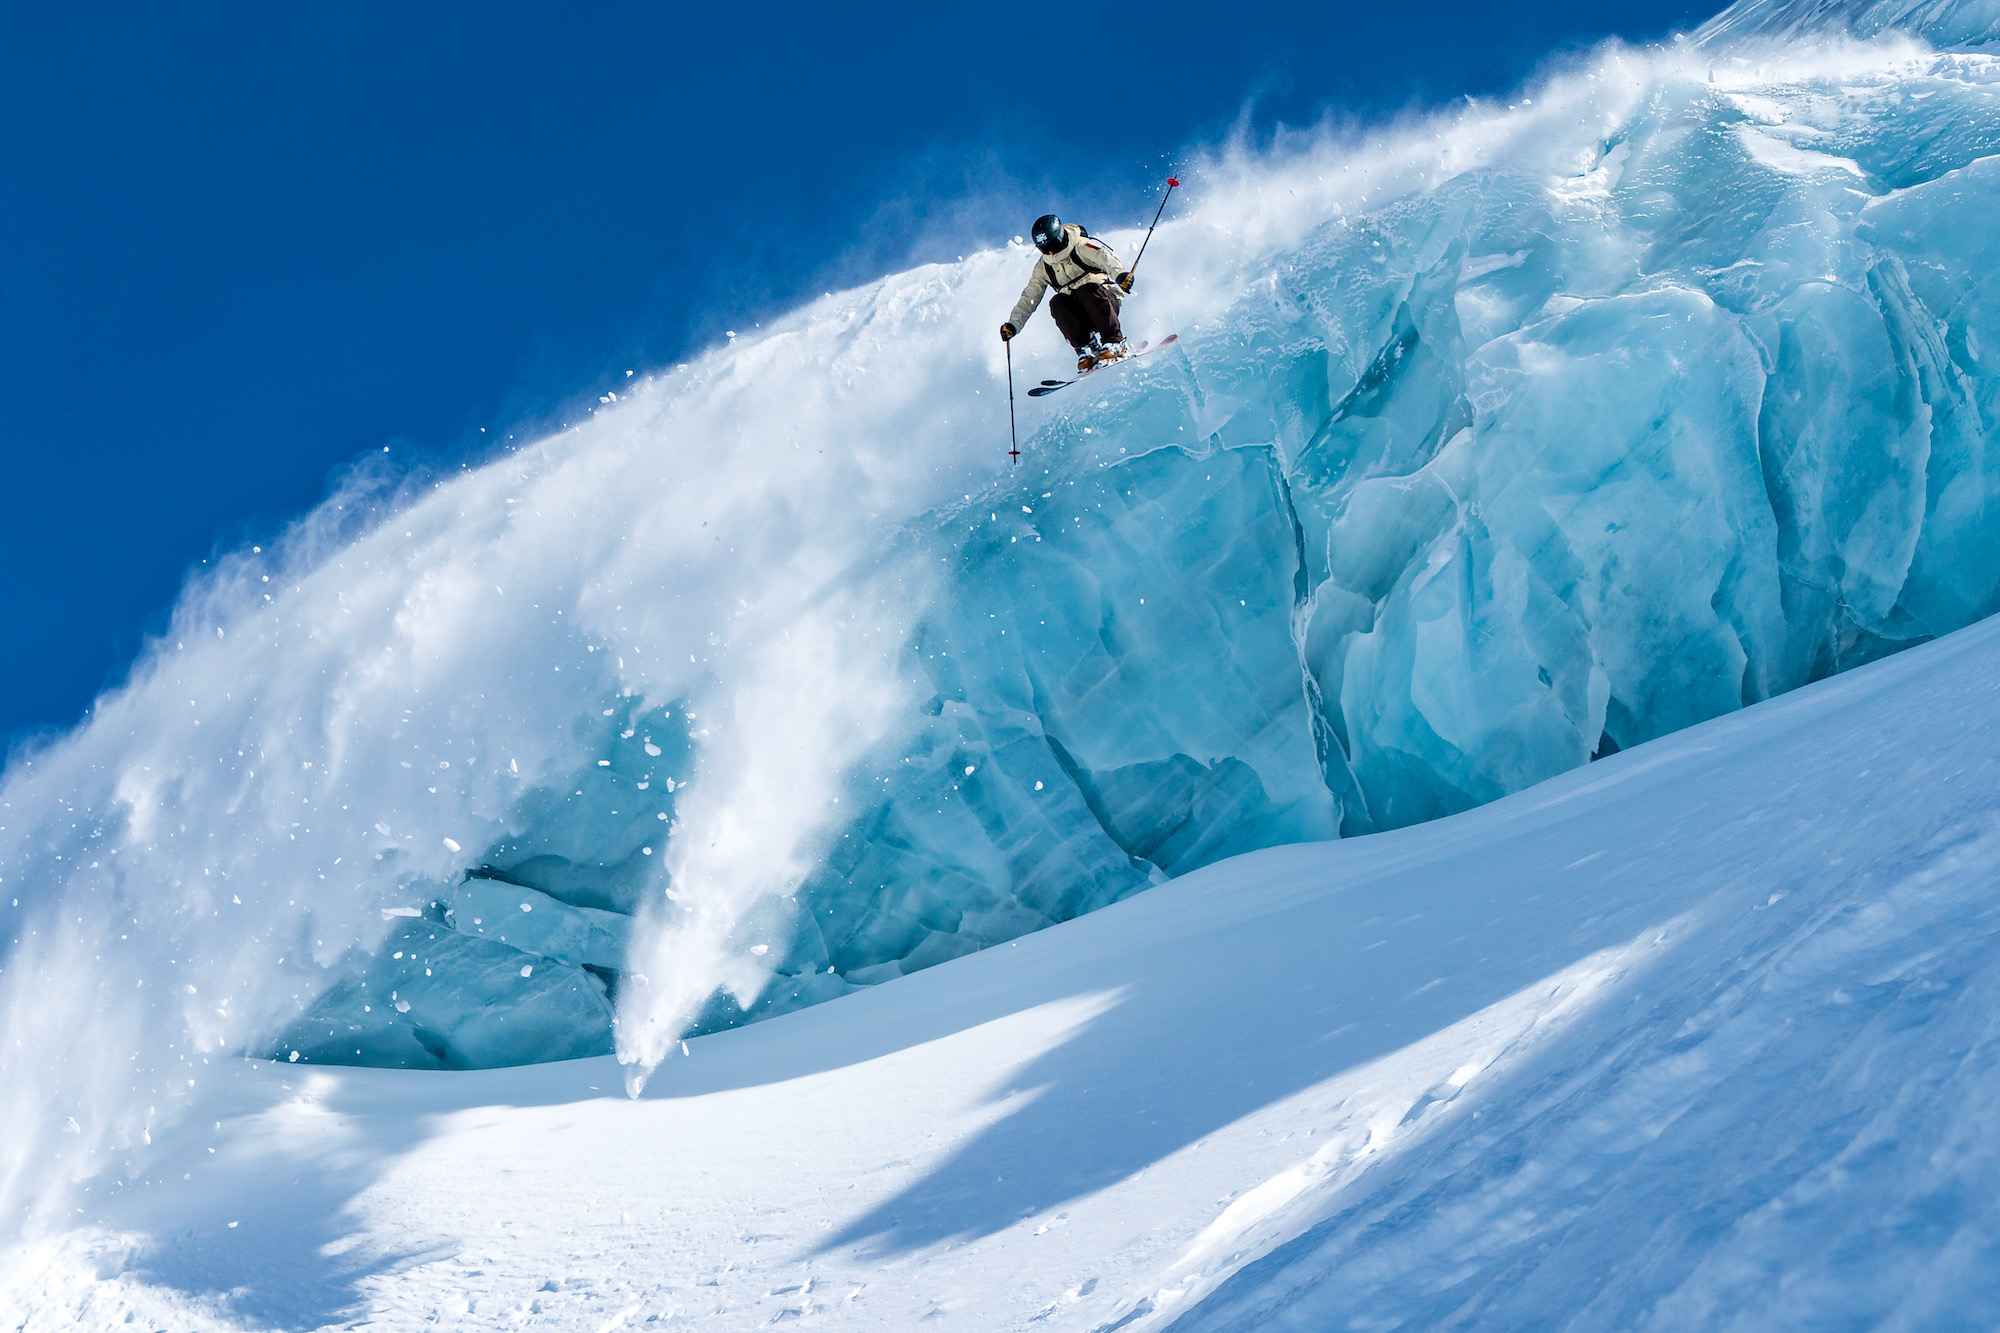 Skier jumping off a large block of ice in Steinberg glacier.